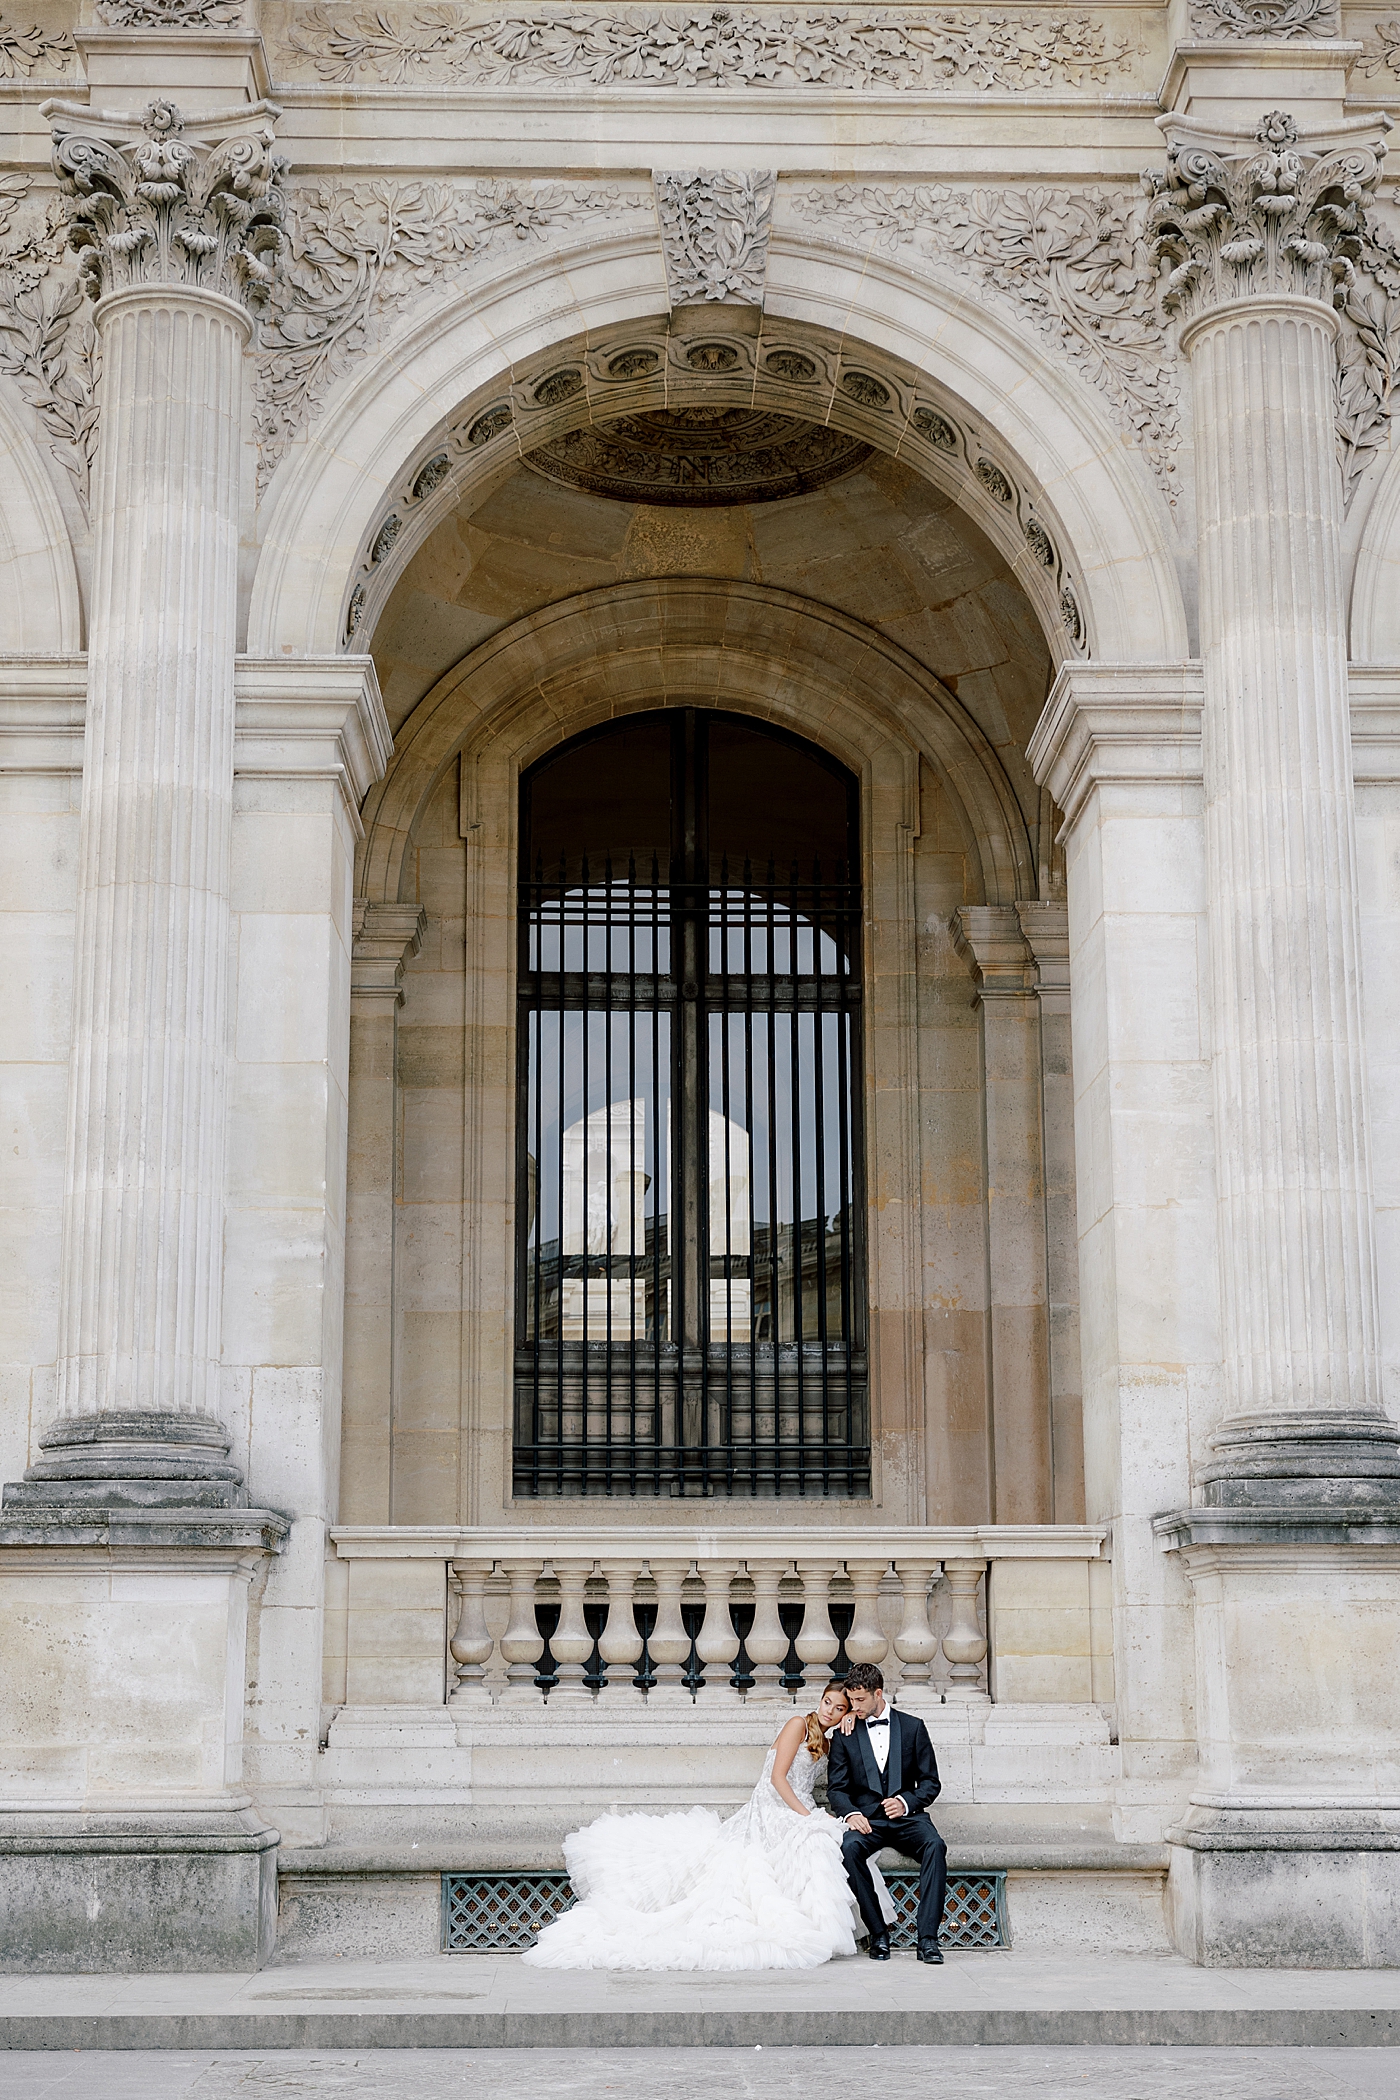 Bride and groom sitting together on a concrete bench during a Paris Elopement | Image by Hope Helmuth Photography